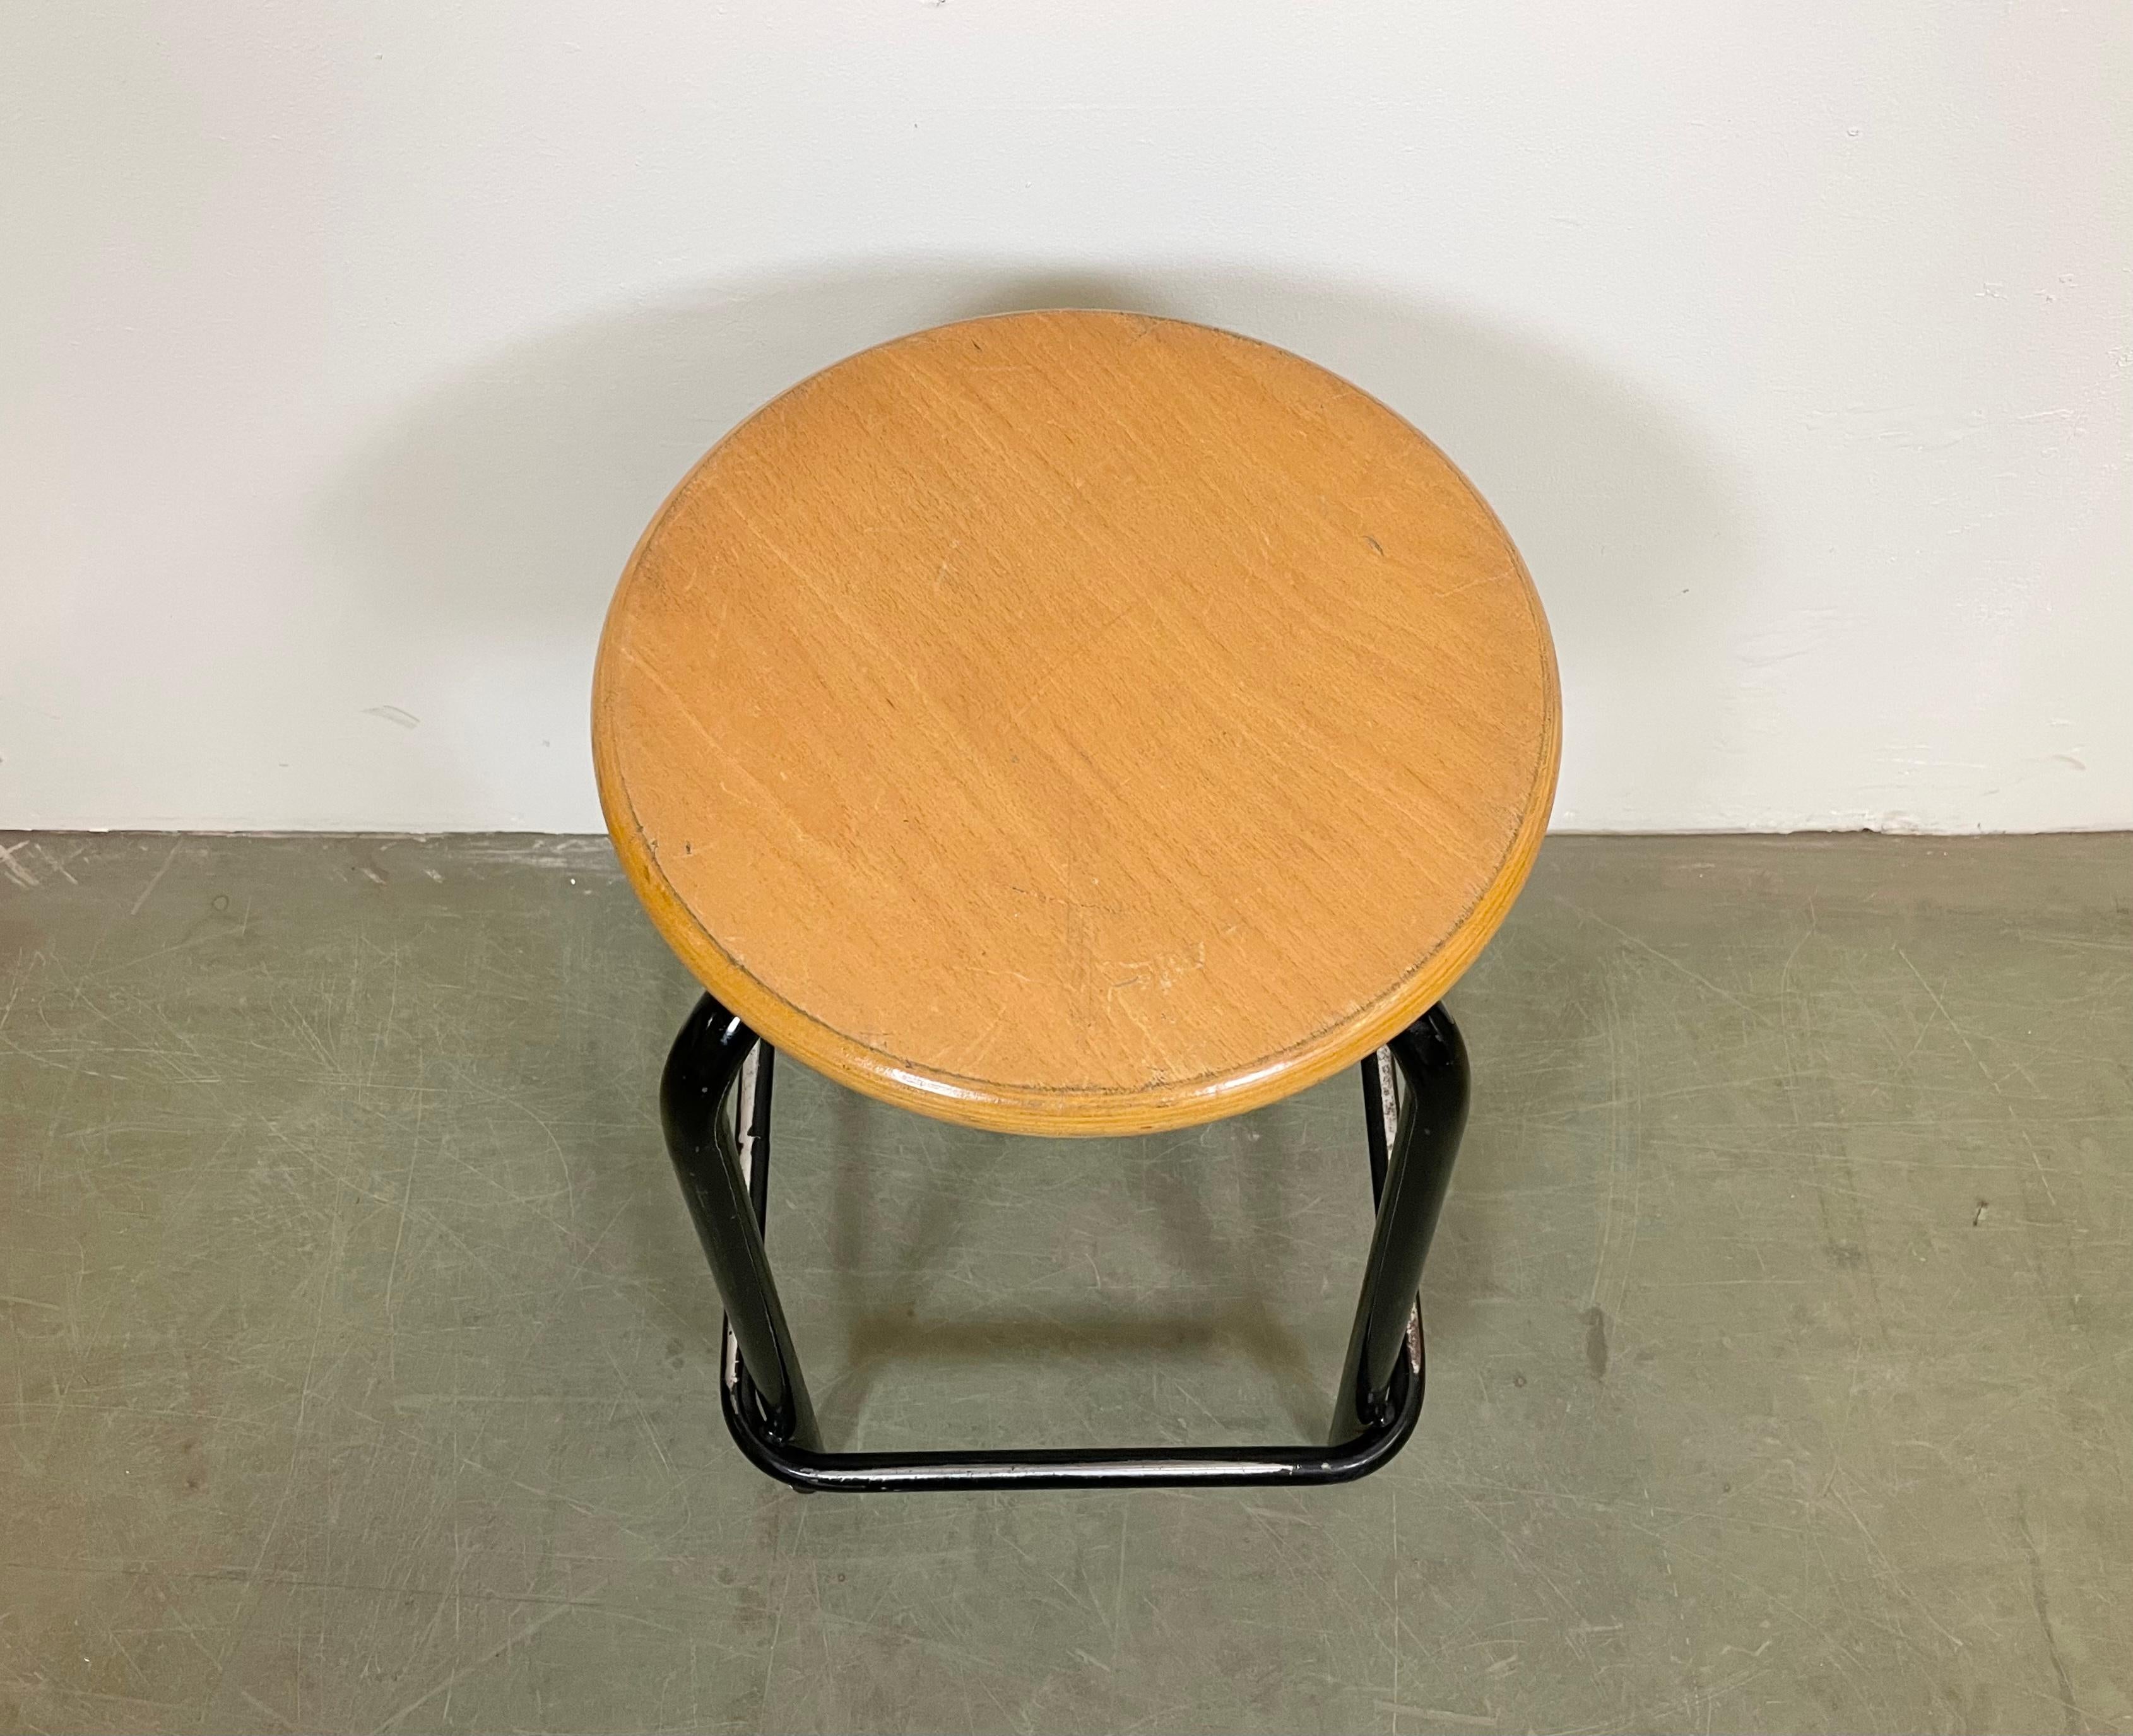 Vintage Industrial Italian Stool, 1970s In Good Condition For Sale In Kojetice, CZ